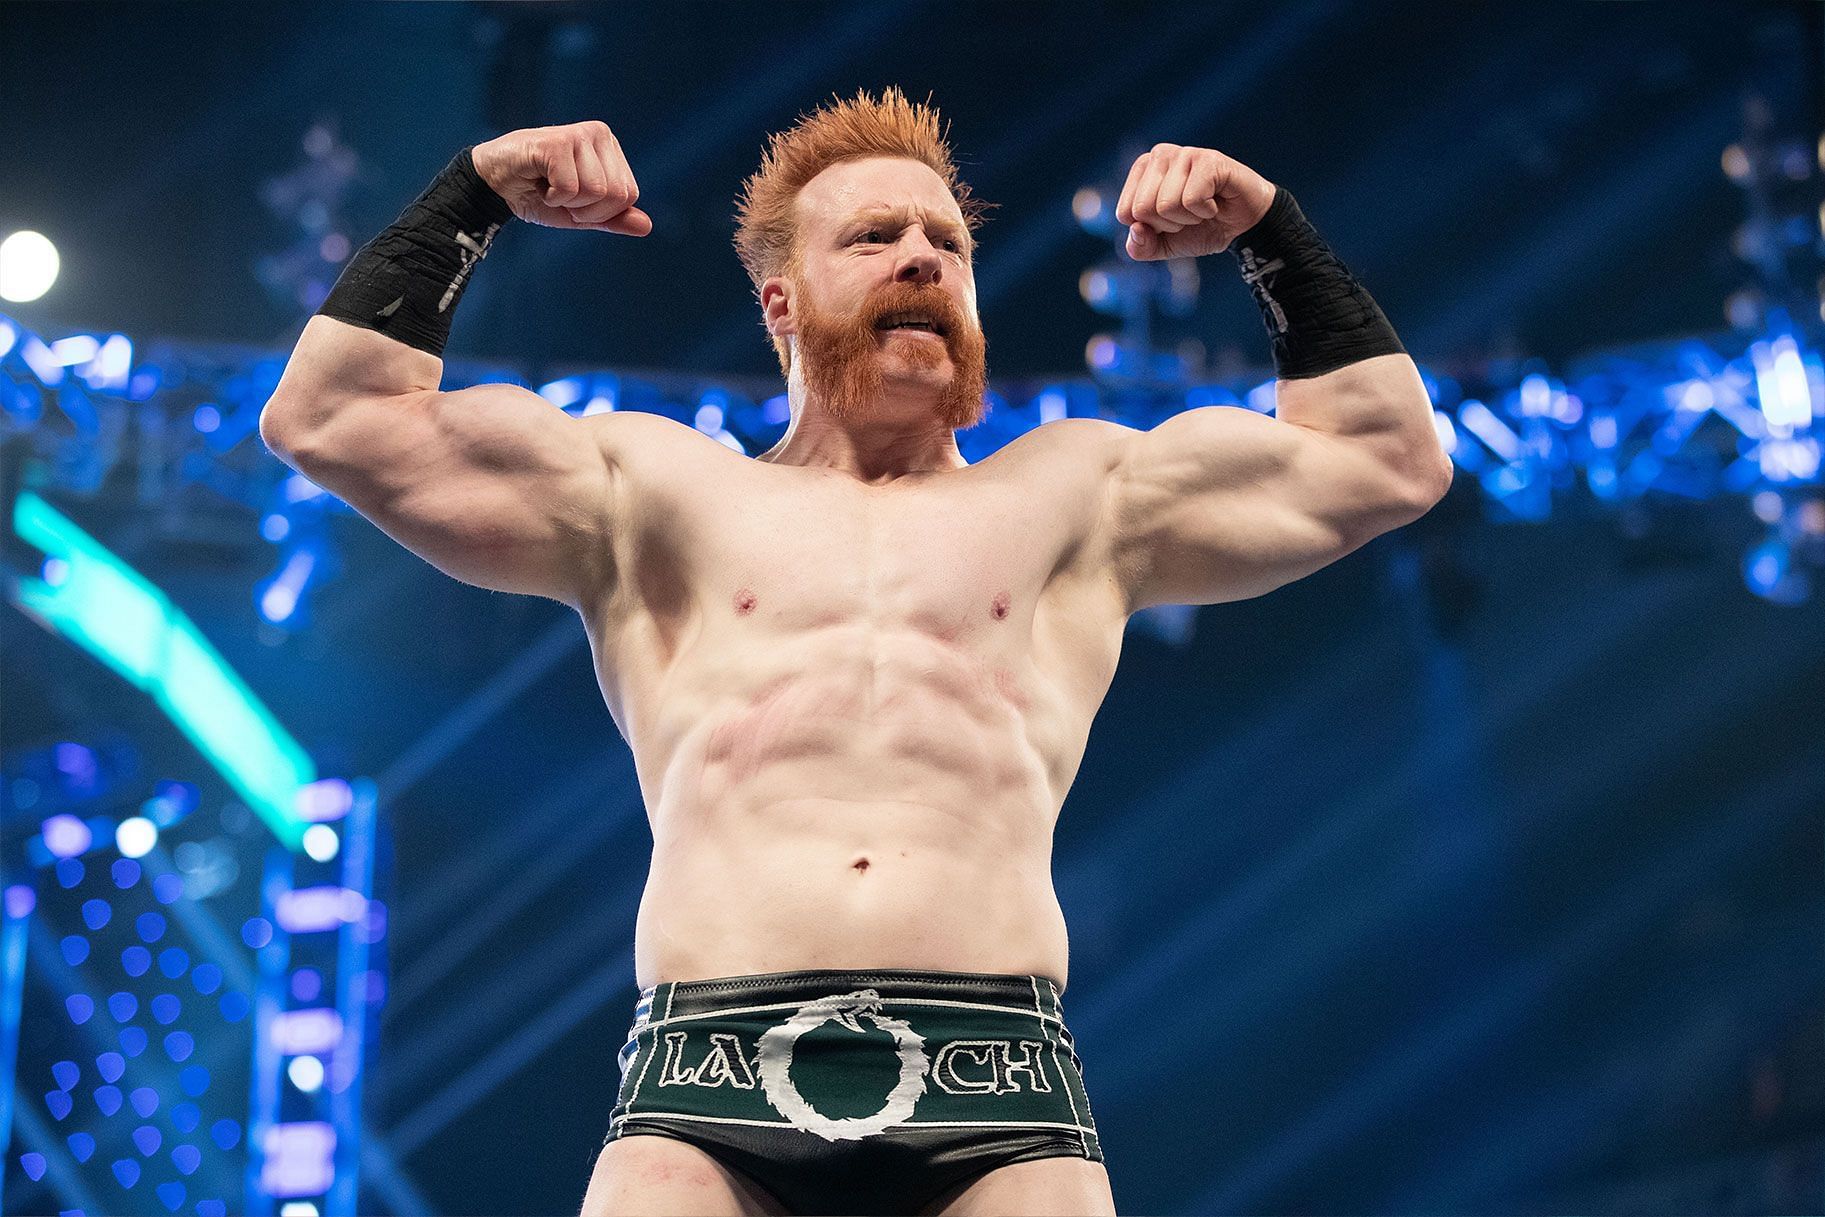 Sheamus has one of the most impressive physiques in WWE right now